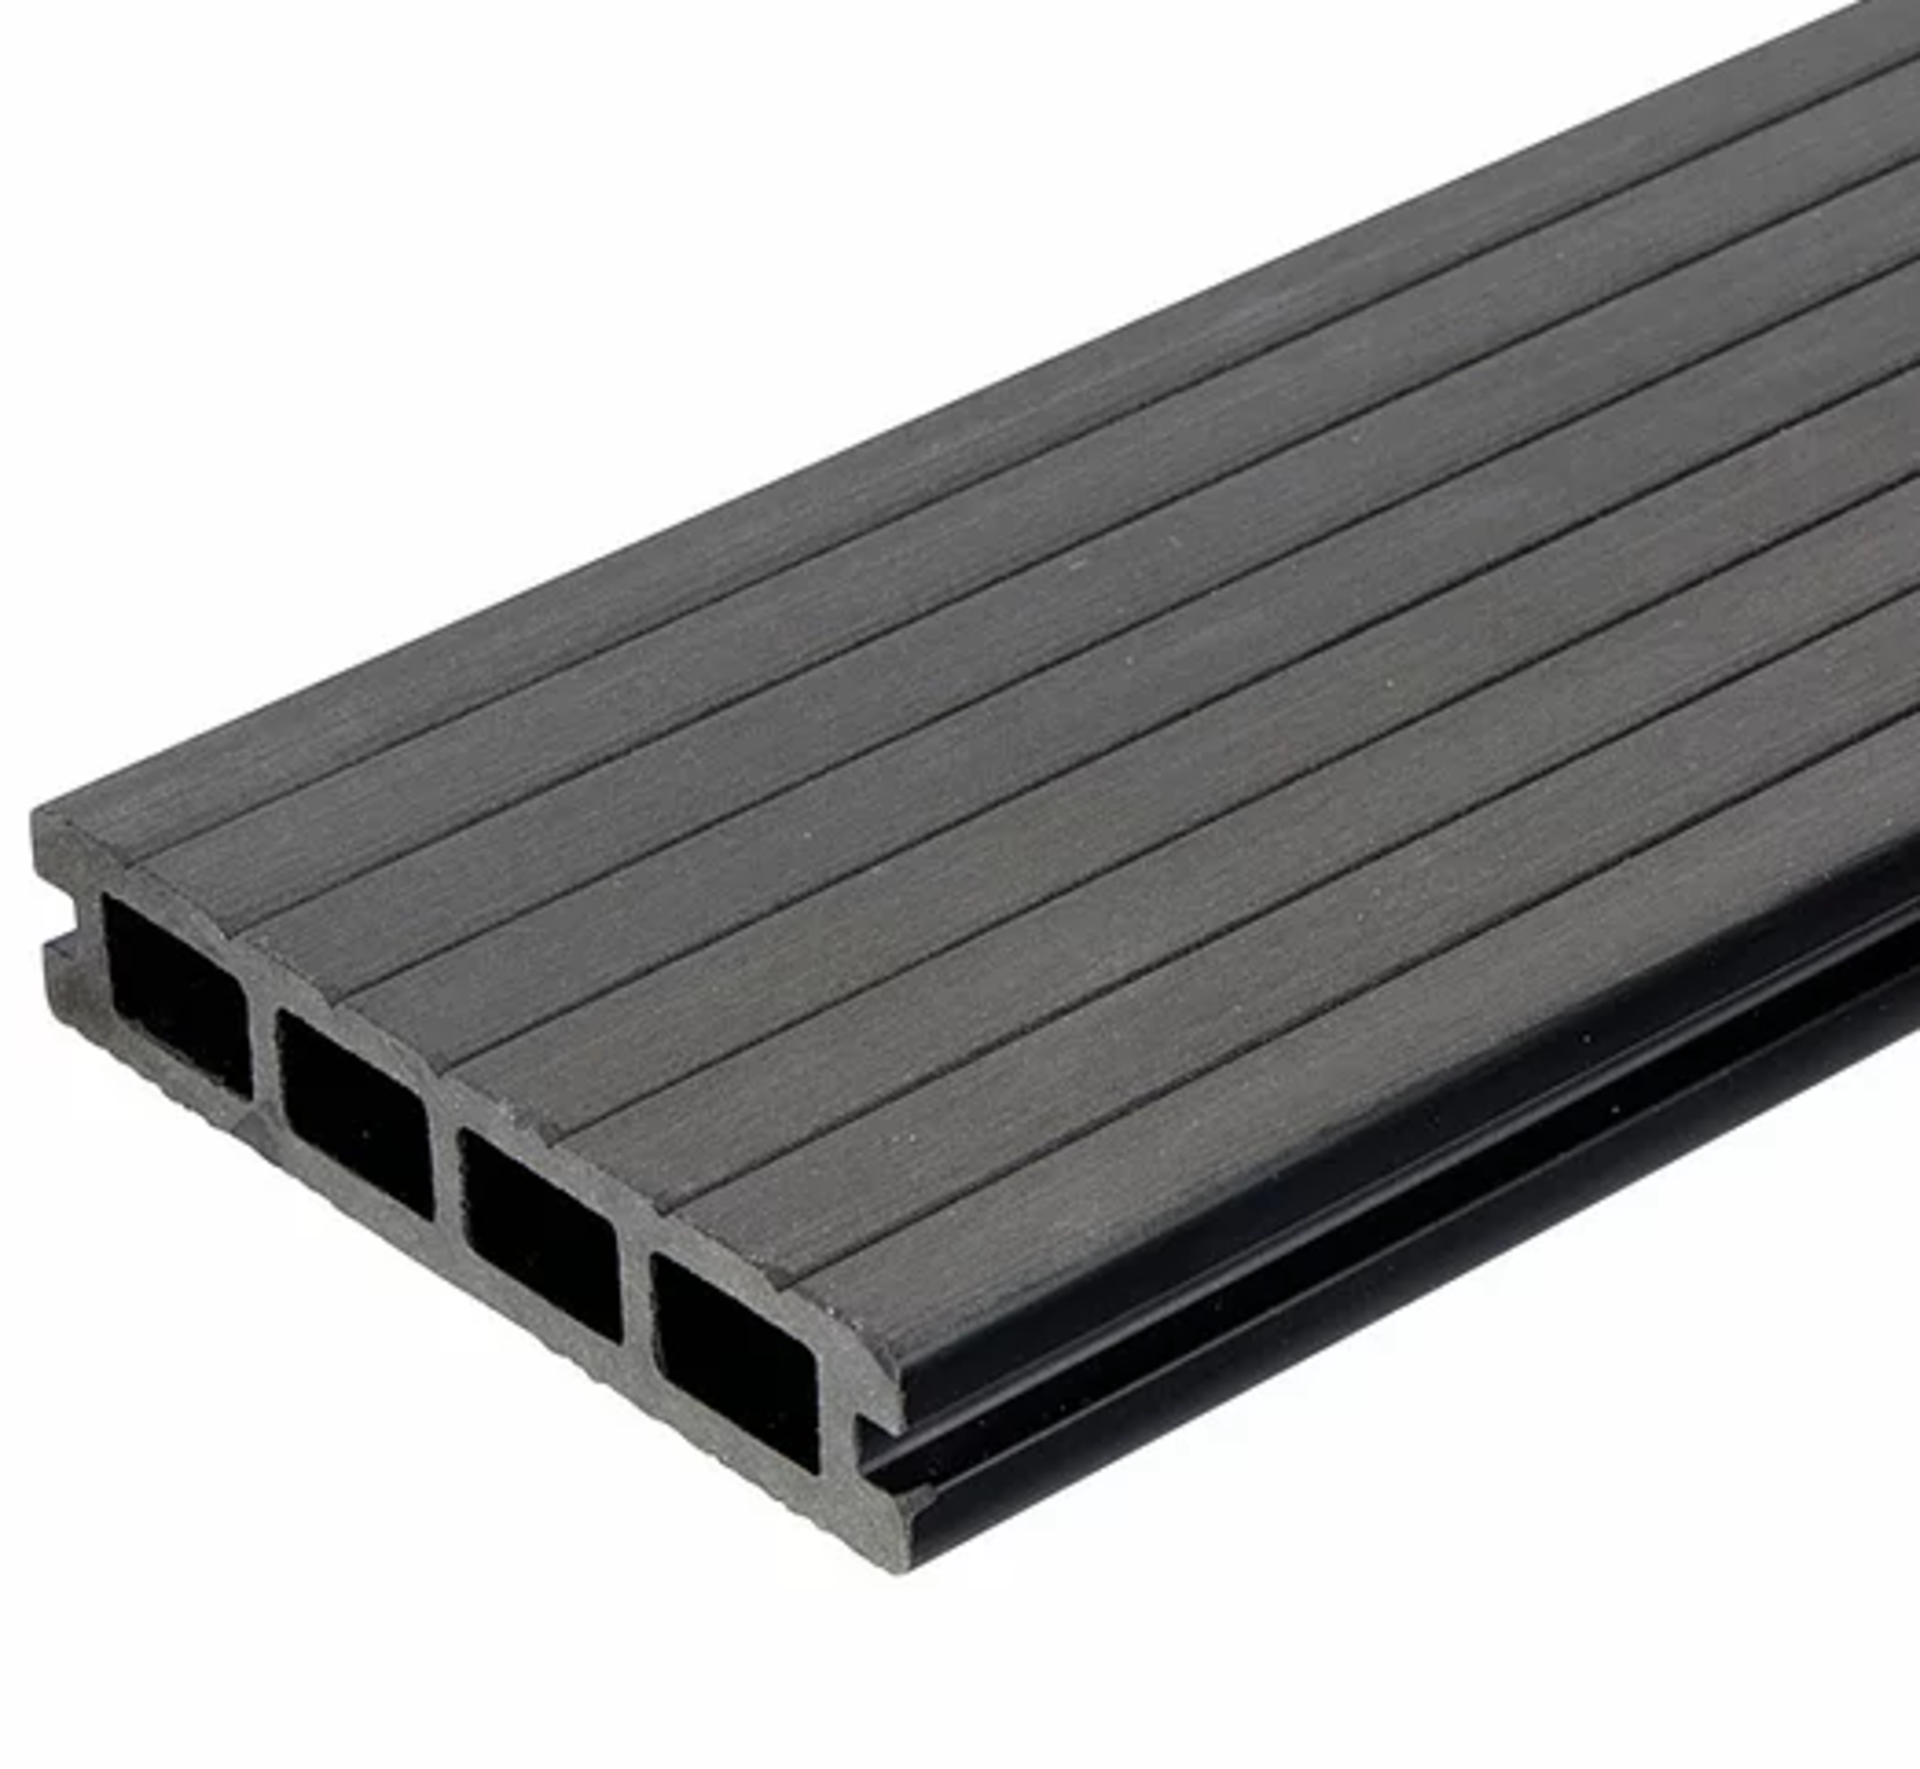 * 20 WPC Composite Dark Grey Double sided Embossed Woodgrain Decking Boards 2900mm x 146mm x 25mm - Image 3 of 4